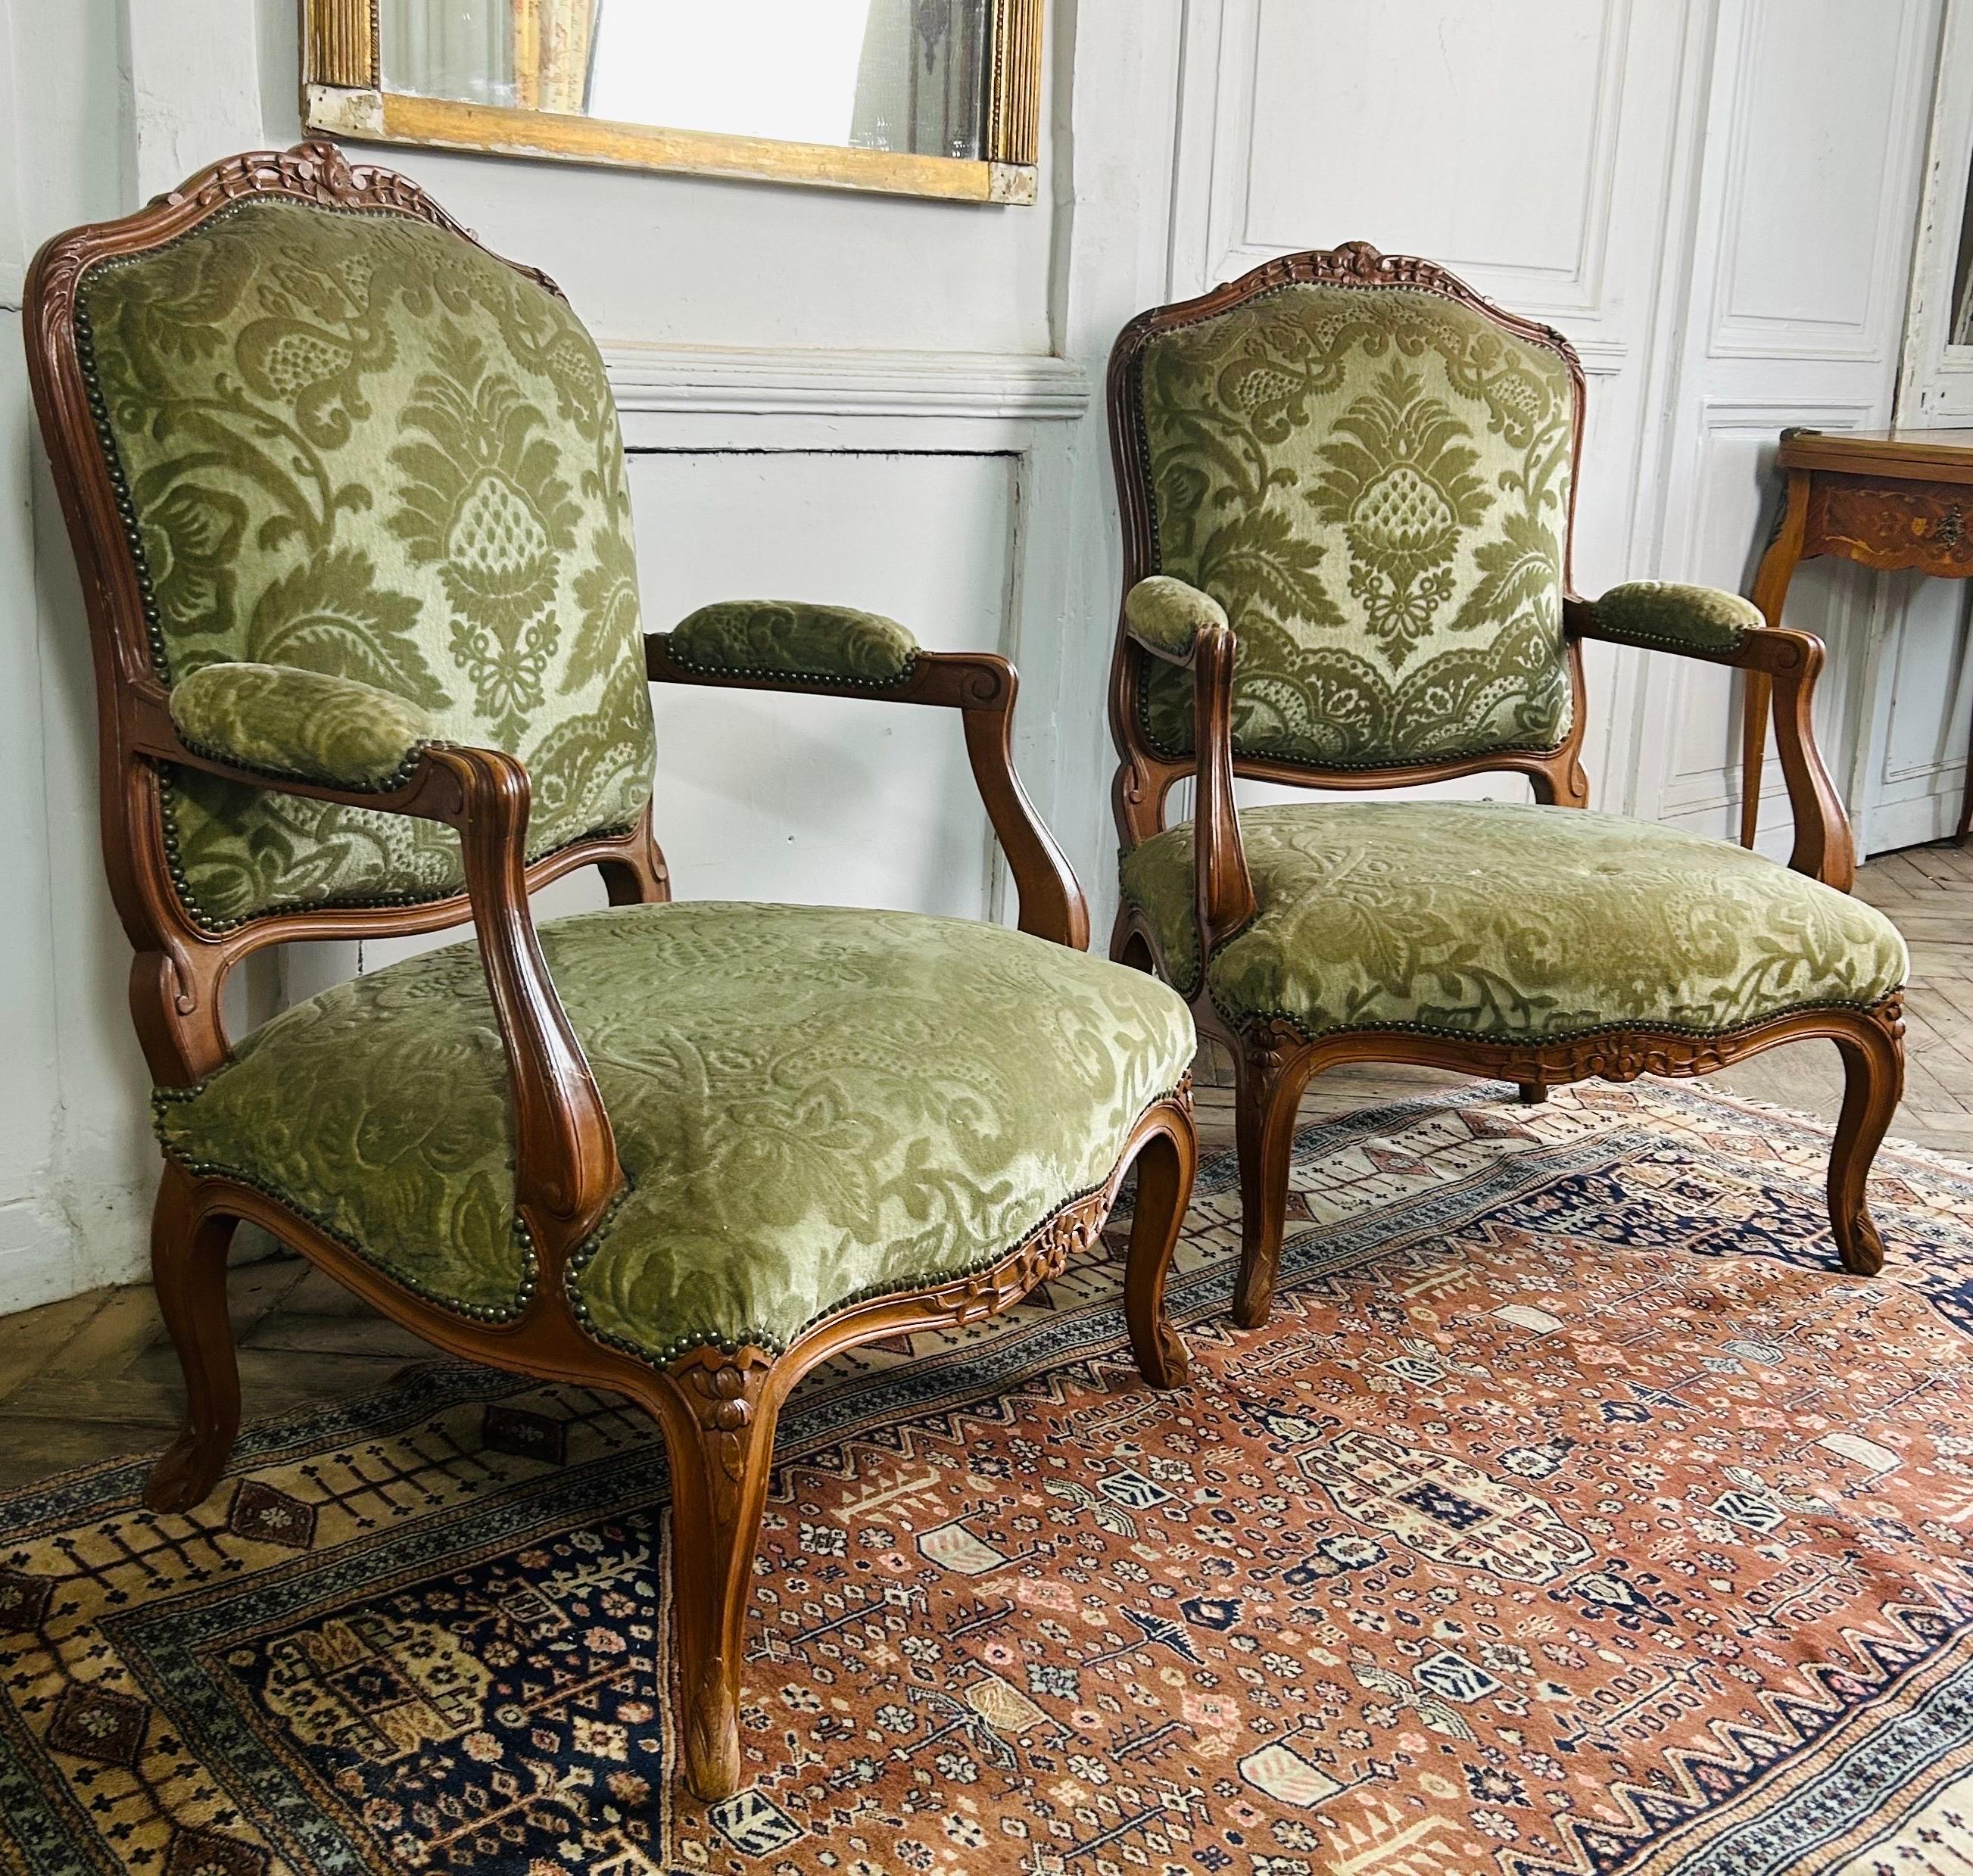 Charming pair of Louis 15 style cabriolet armchairs in beech wood, covered in almond green velvet fabric. Napoleon 3 Period.

2 Very beautiful flat-backed armchairs called “à la reine” in molded wood and carved with shells, flowers and flowering